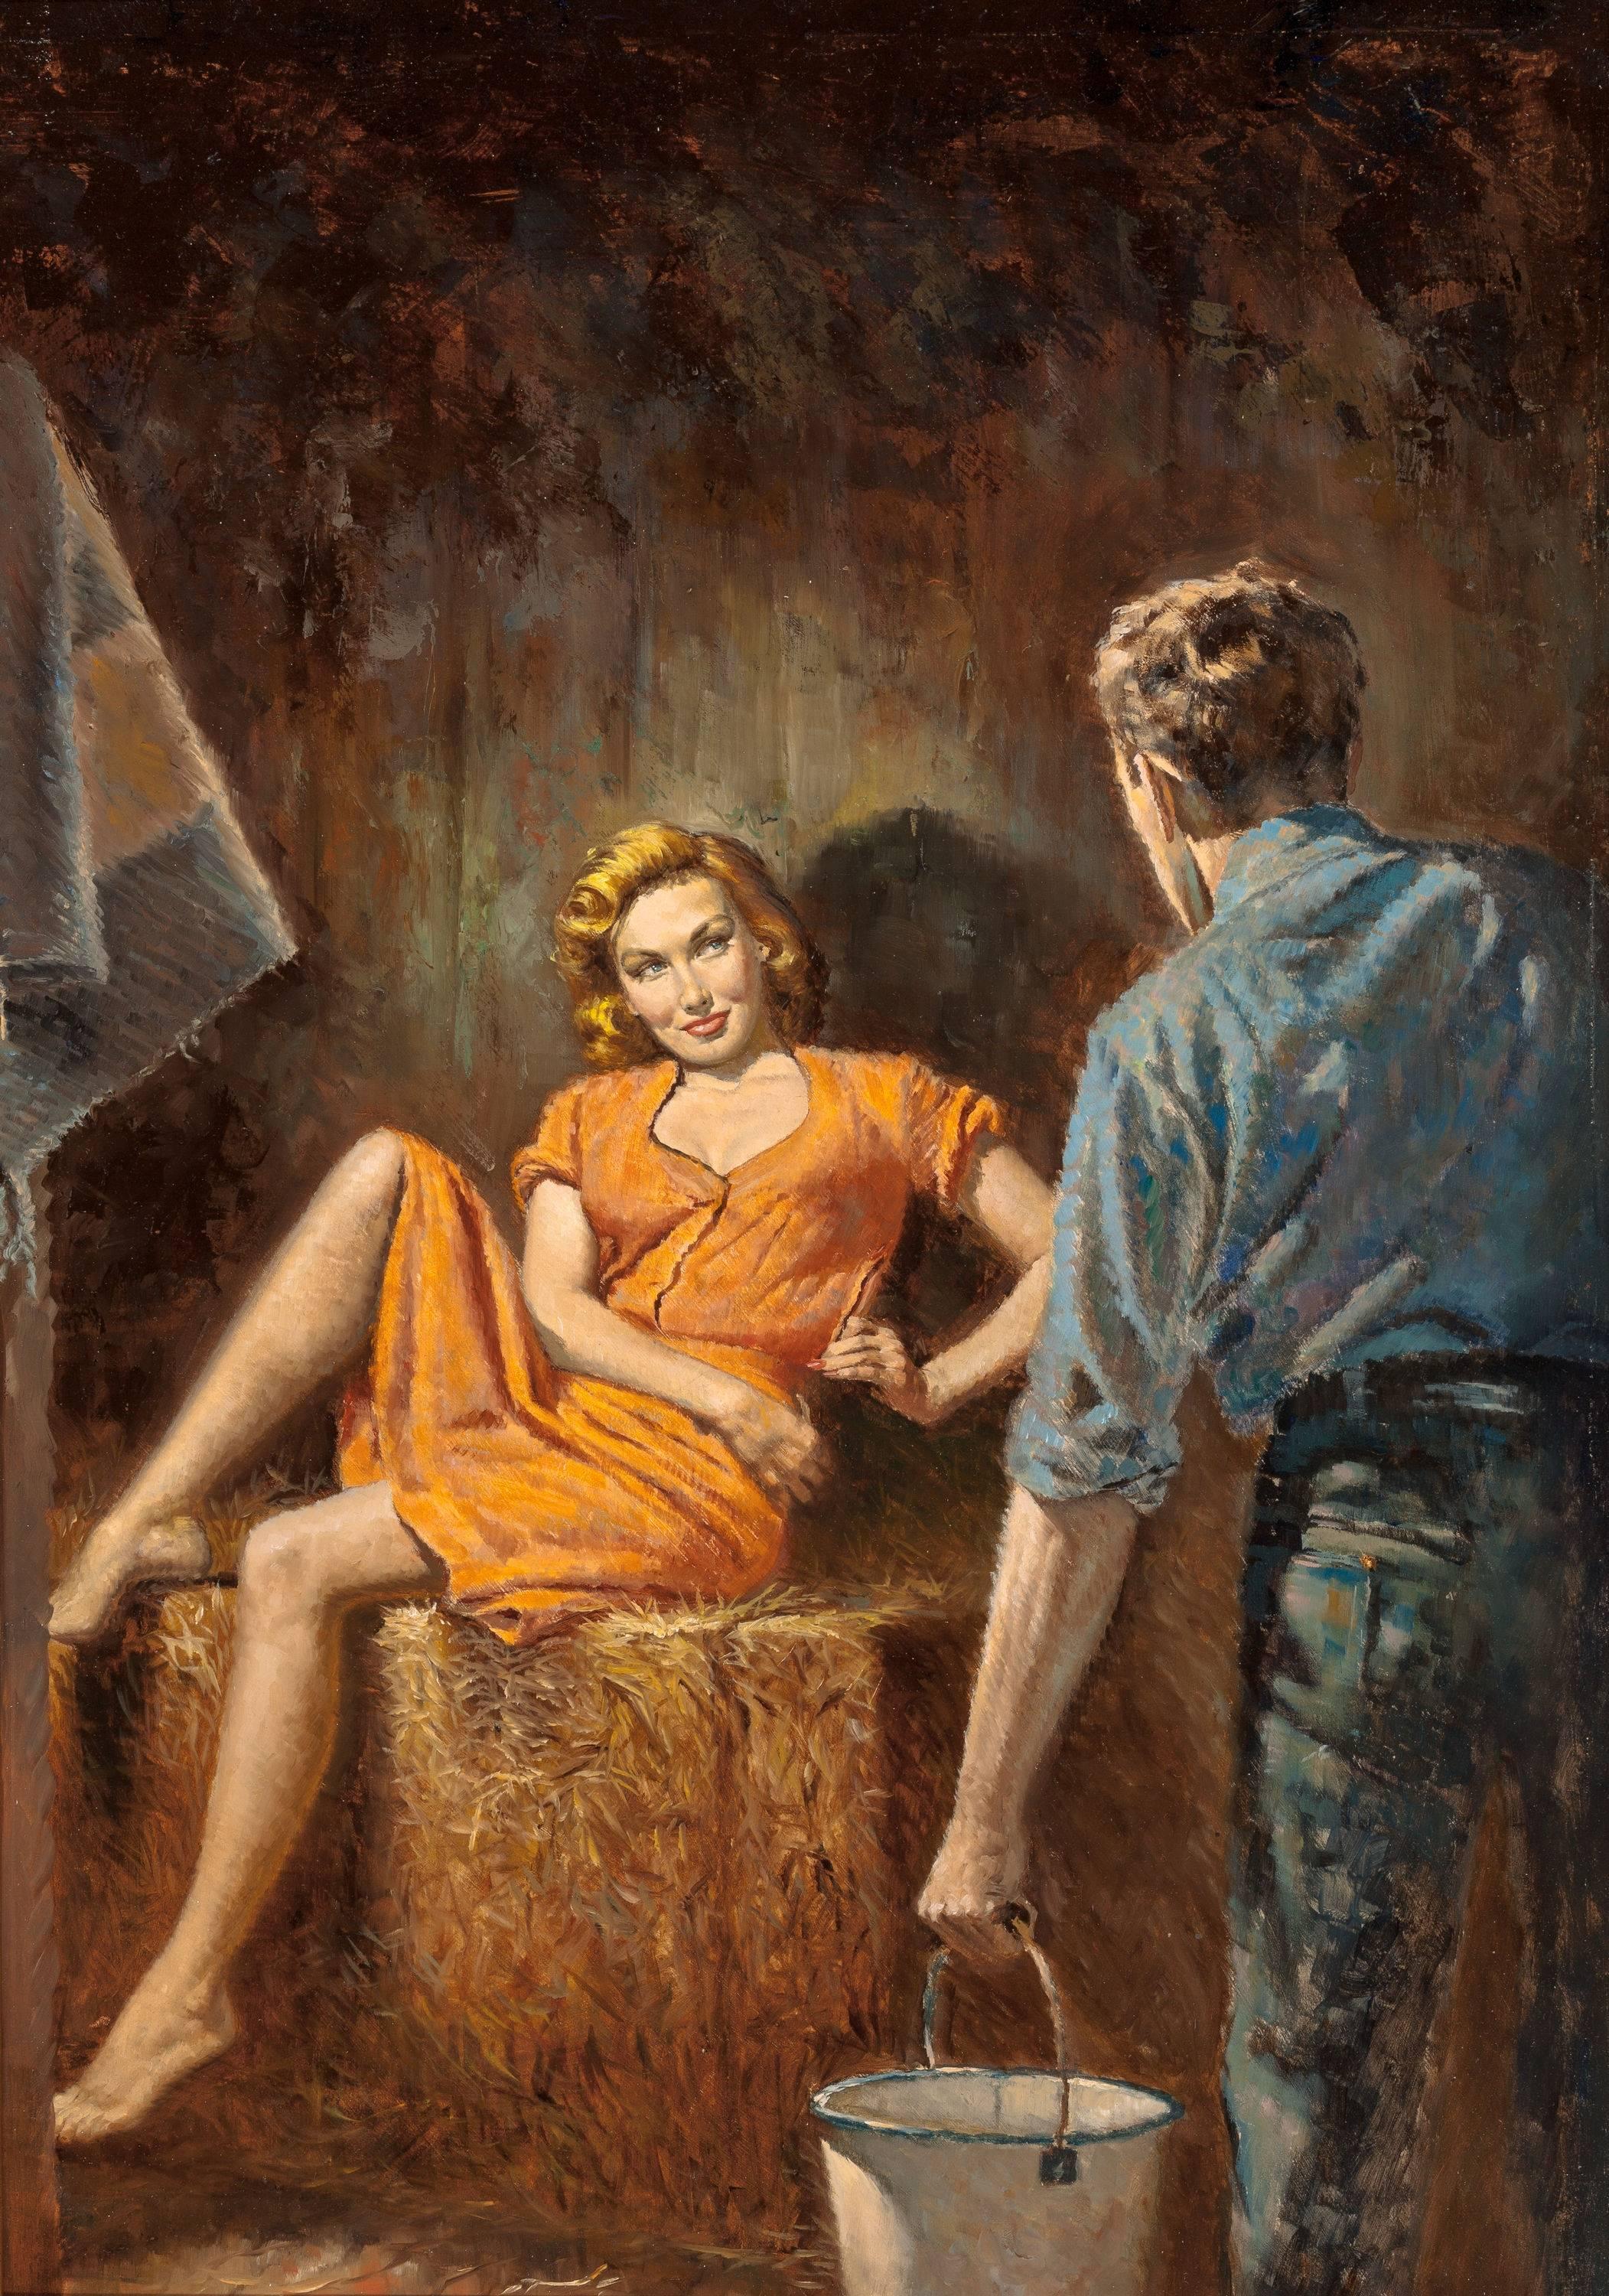 Farmer's Wife - Painting by Rudy Nappi